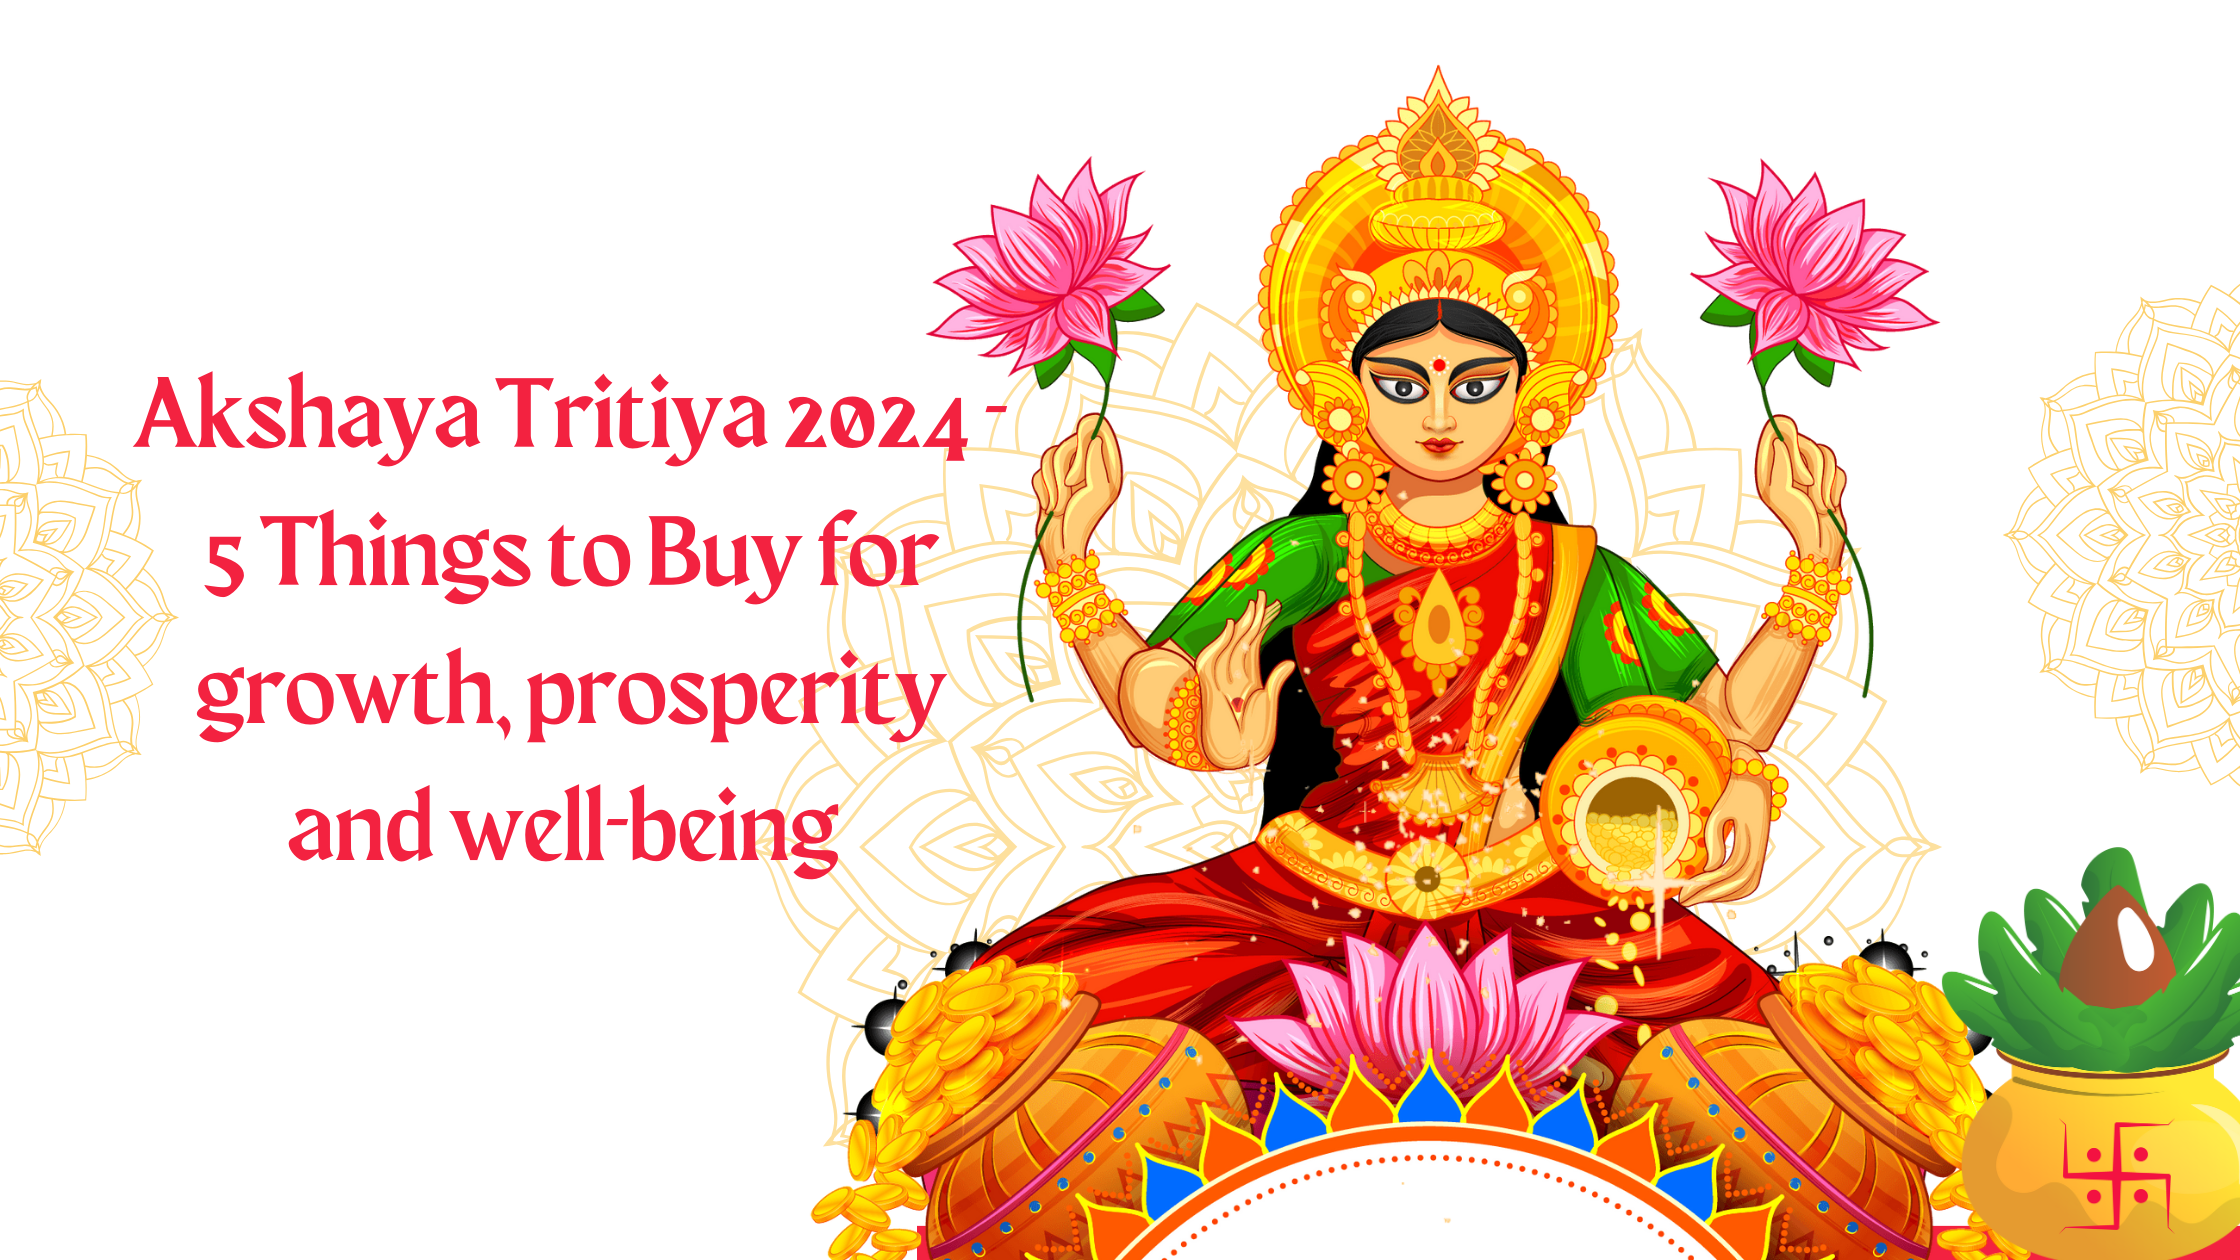 Akshaya Tritiya 2024 - 5 Things to Buy for growth, prosperity and well-being